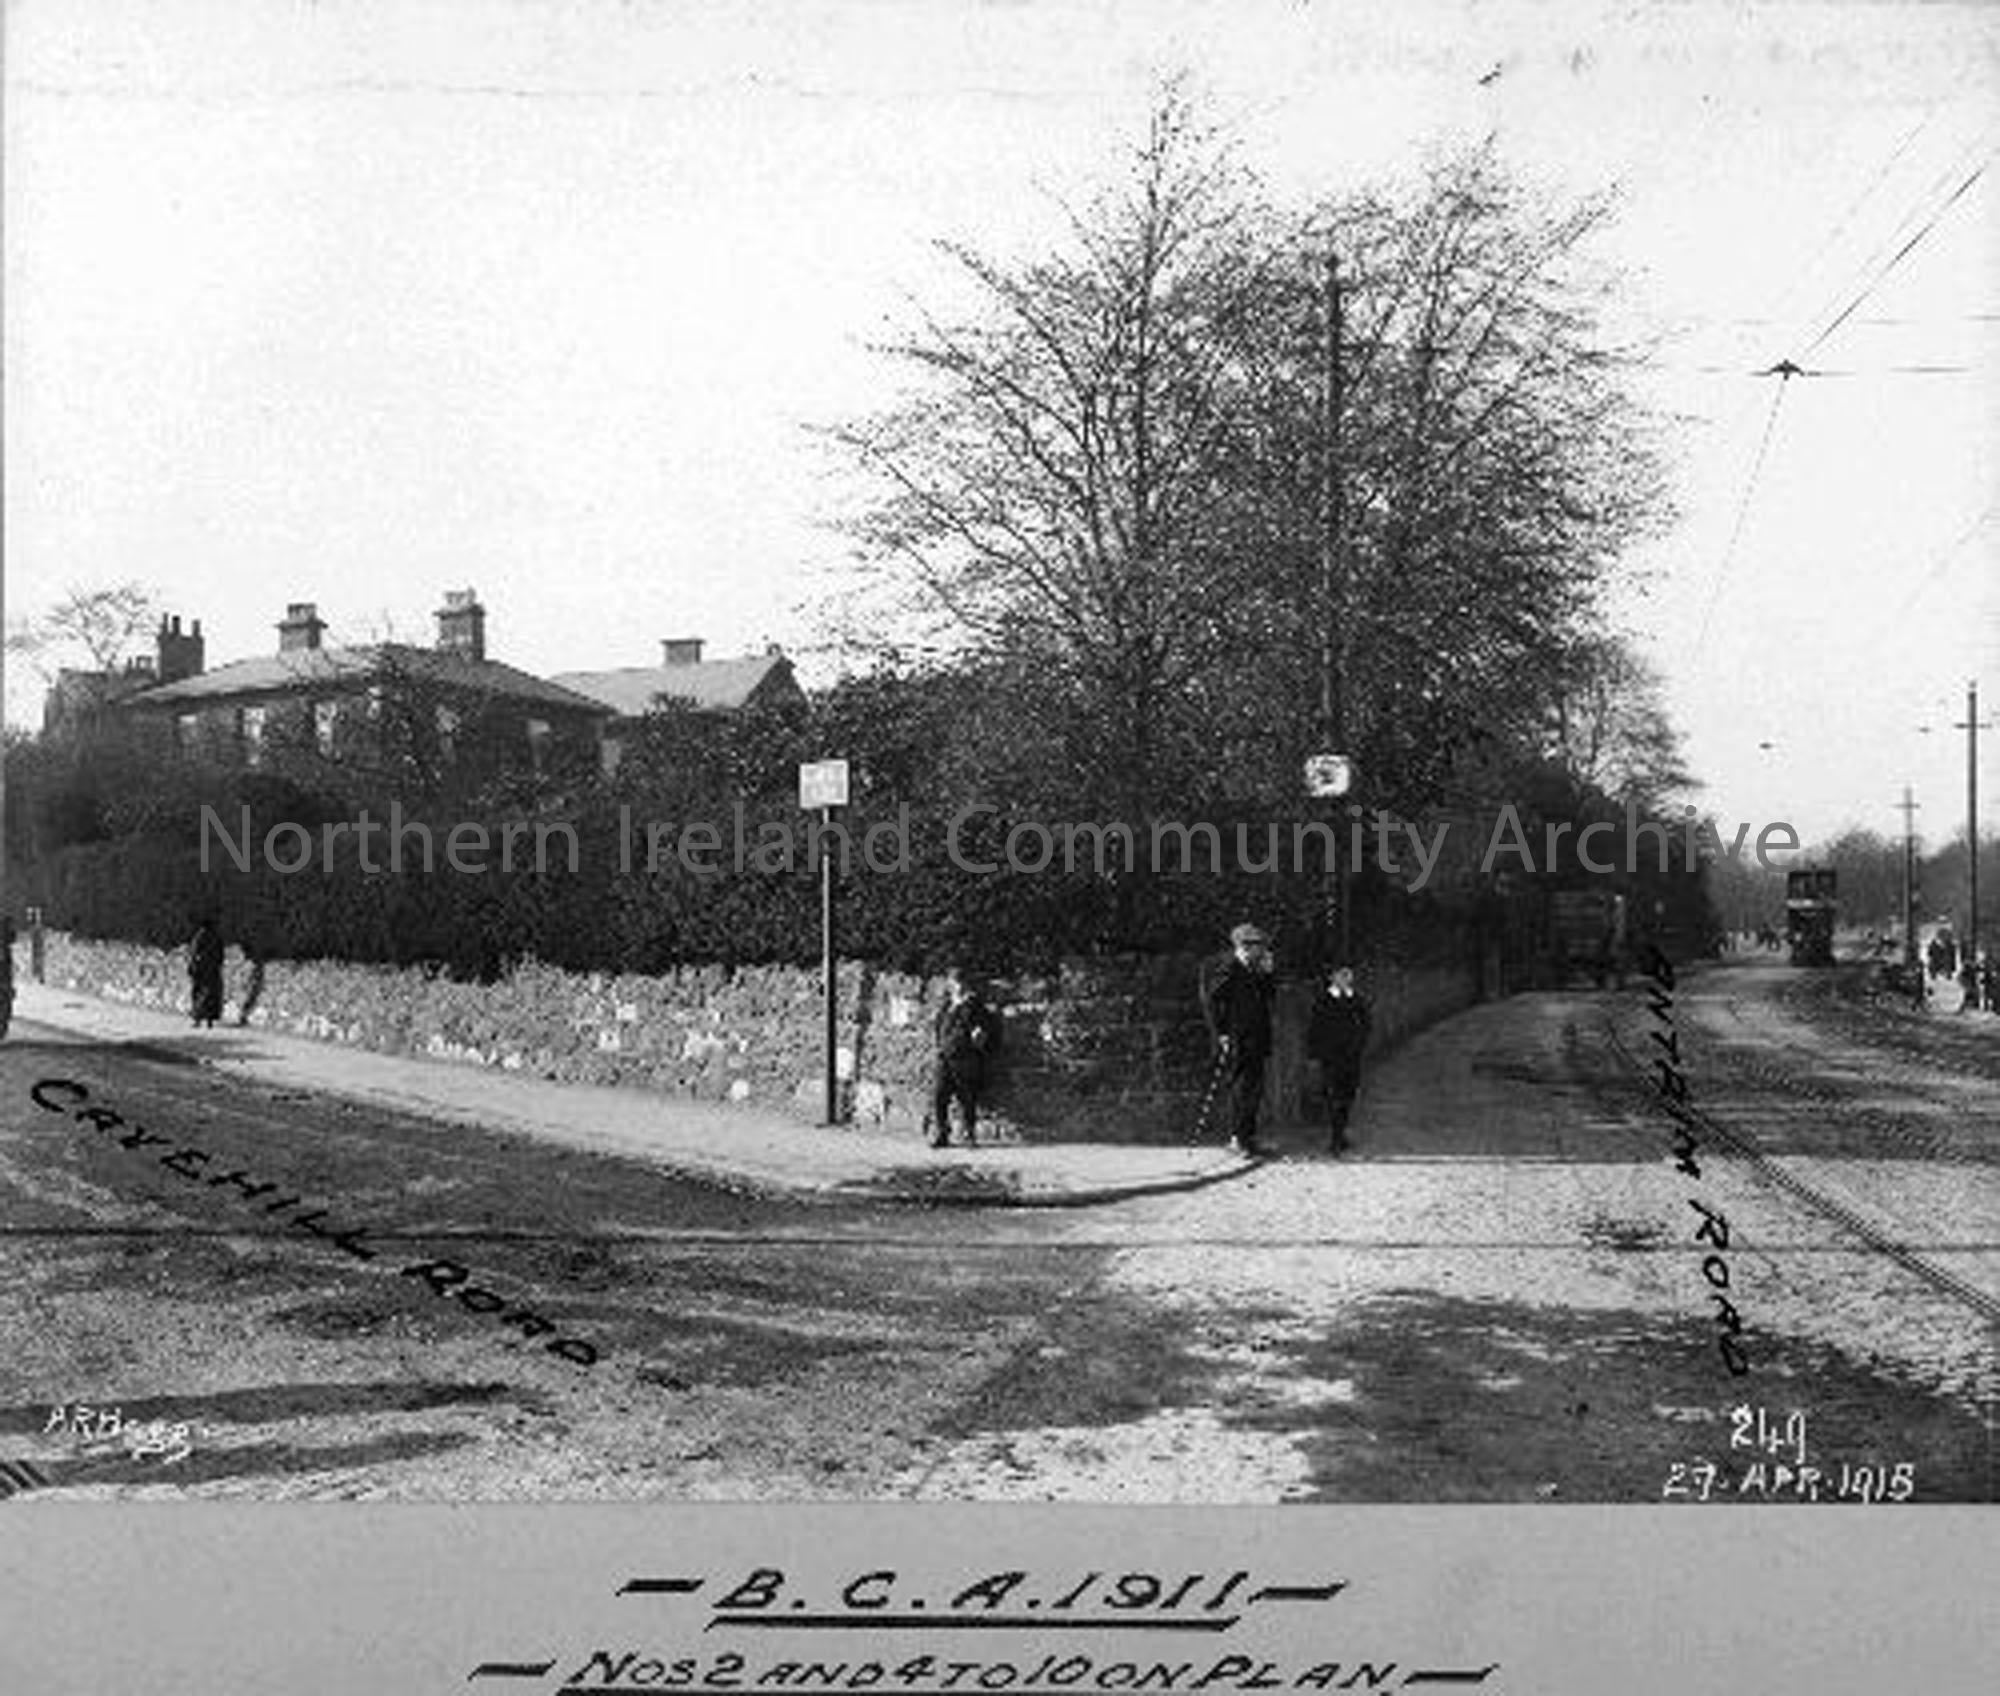 Cavehill Road – Nos 2 to 4 and 10 on plan (1756)